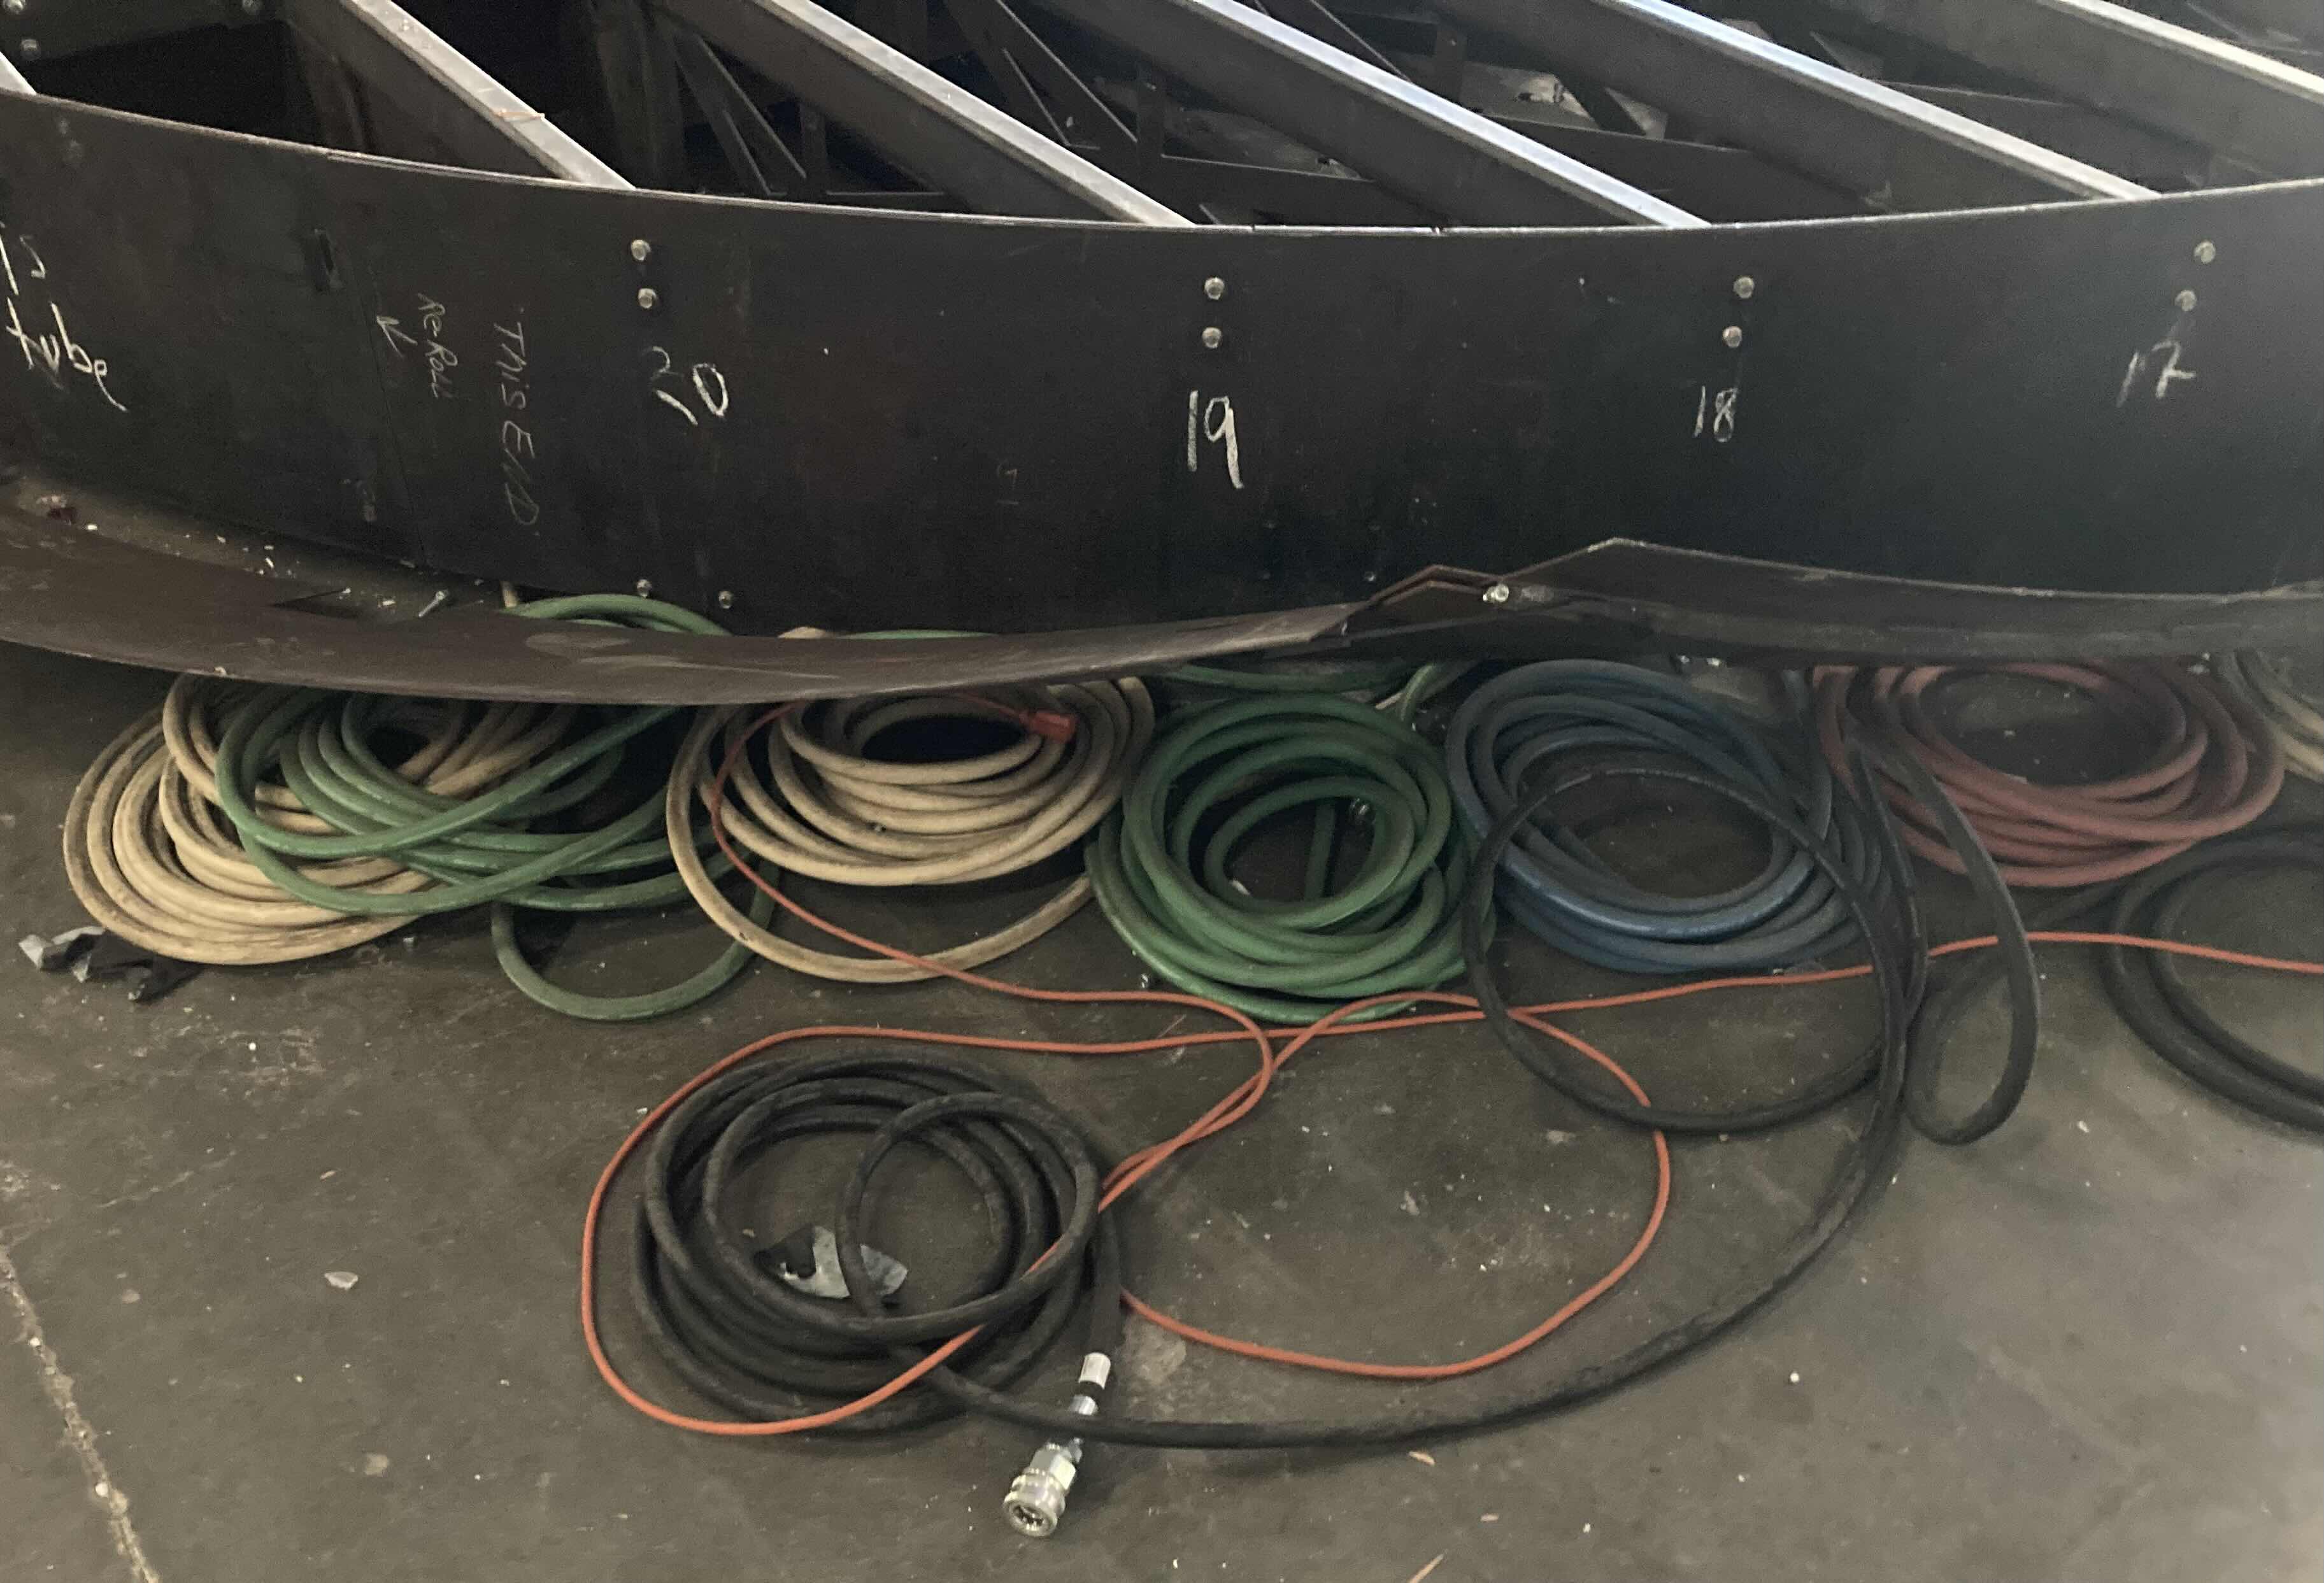 Photo 18 of CUSTOM FABRICATED HEAVY-DUTY STEEL AIR HOSE OPERATED VEHICLE PLATFORM W 19 AIR HOSES FOR BAG LIFT- VARIOUS LENGTHS & PSI CAPACITY 353” X 282” H23” (APPOX 2-3TONS)